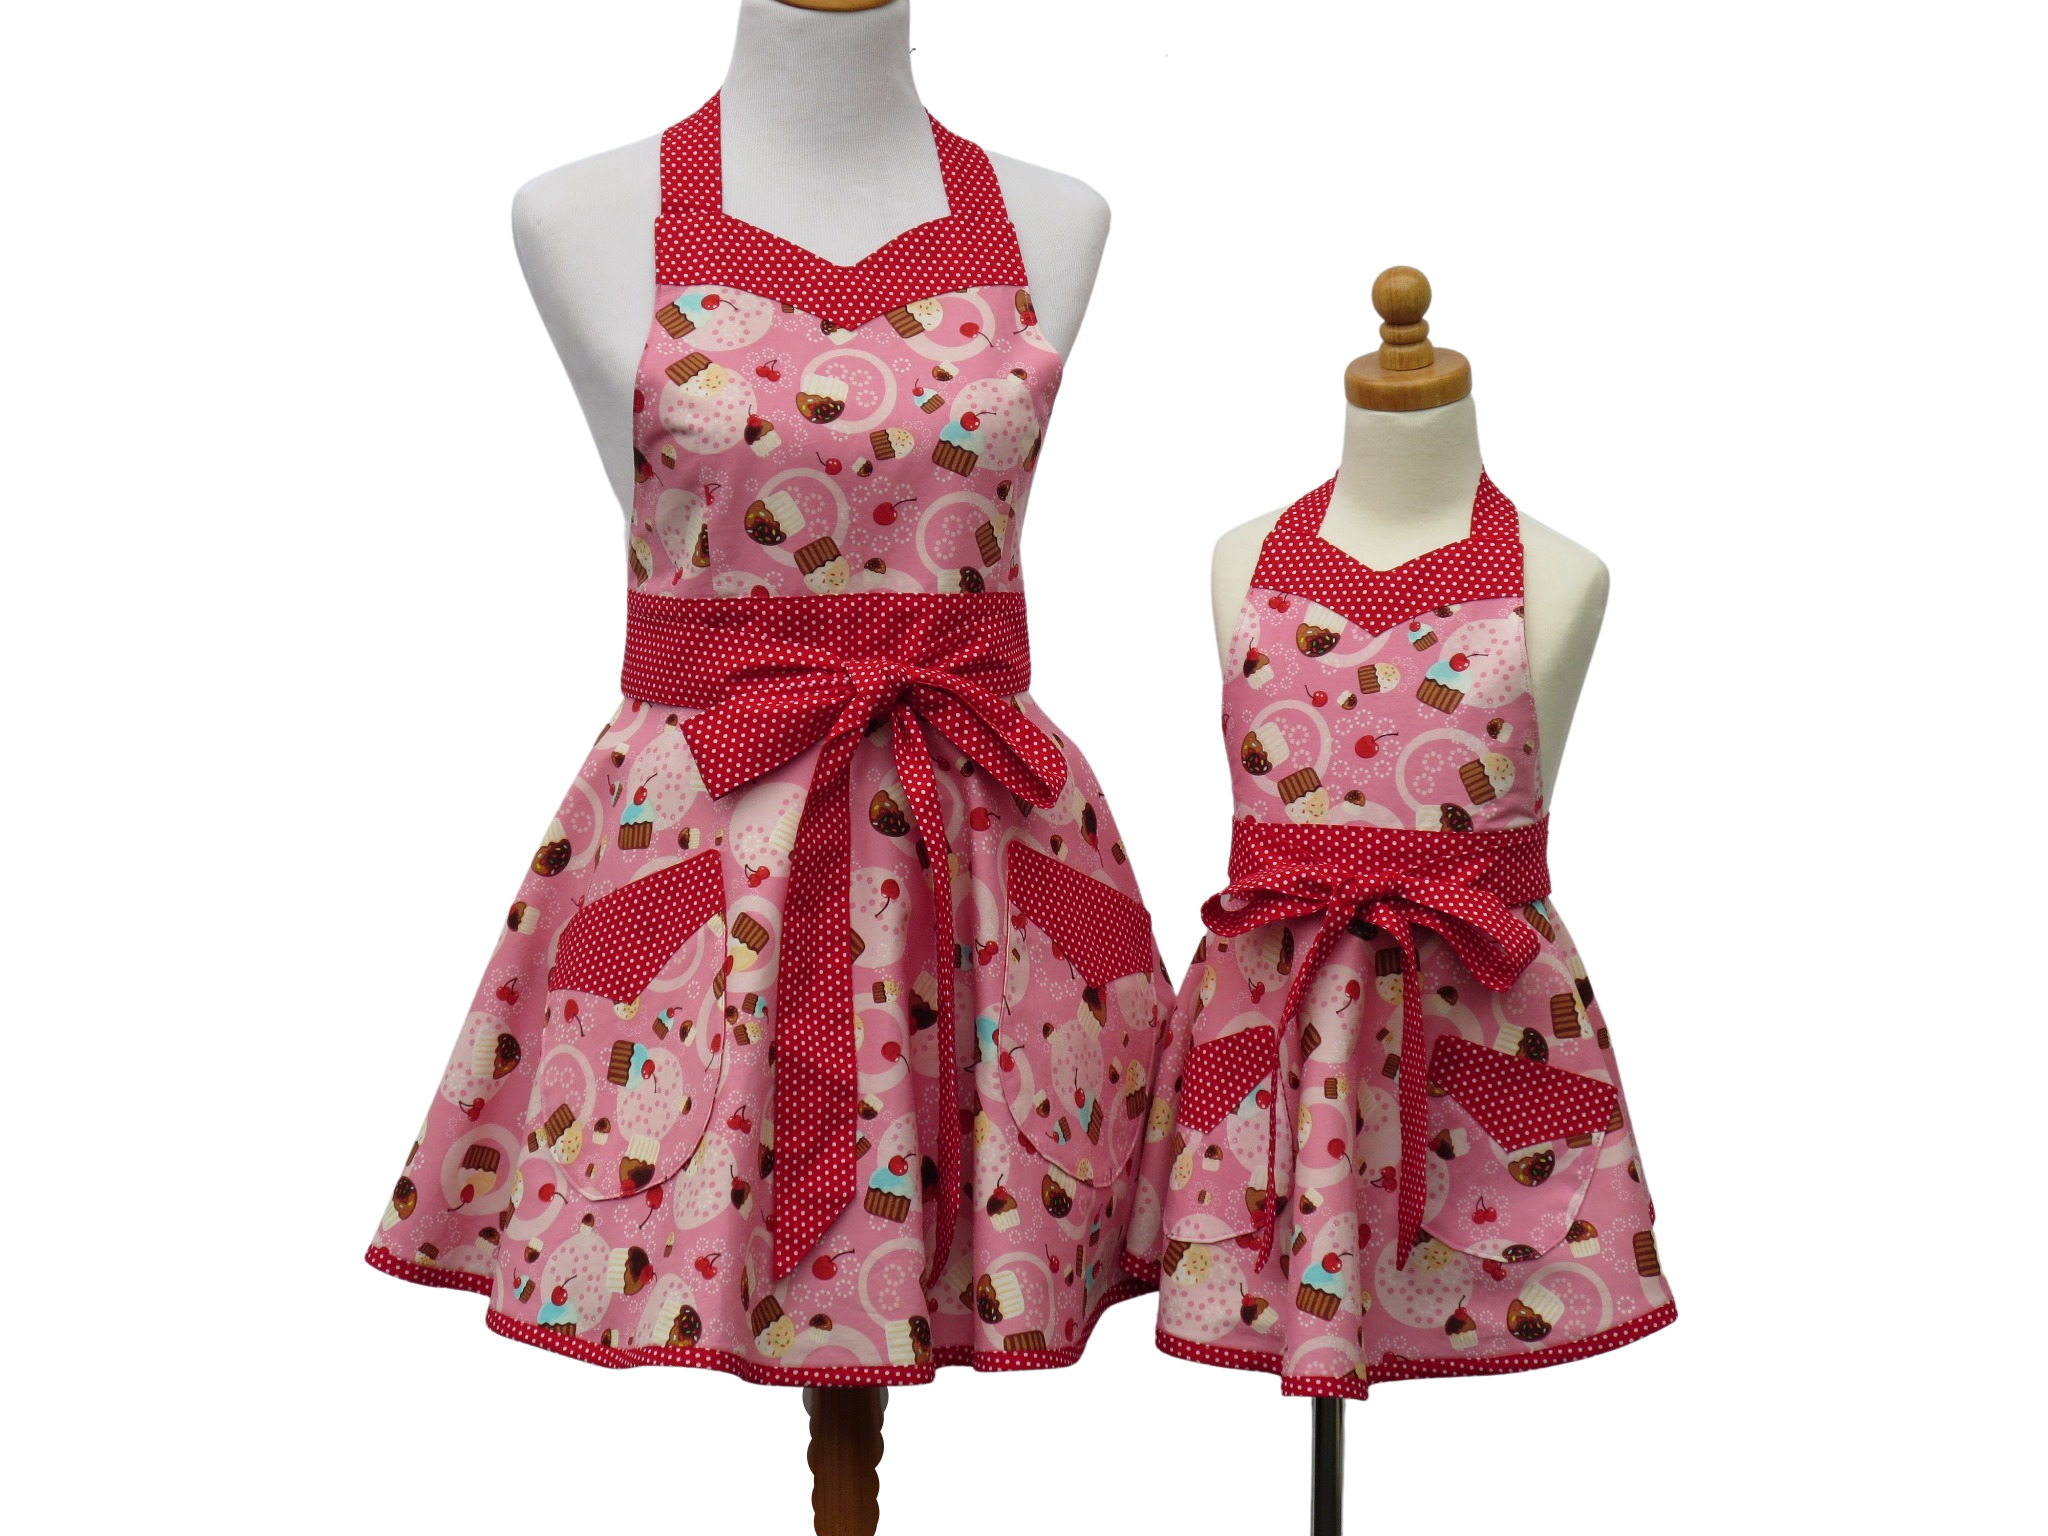 https://www.stitchedbybeverly.com/sites/stitchedbybeverly.indiemade.com/files/mother_daughter_pink_cupcake_aprons.jpg